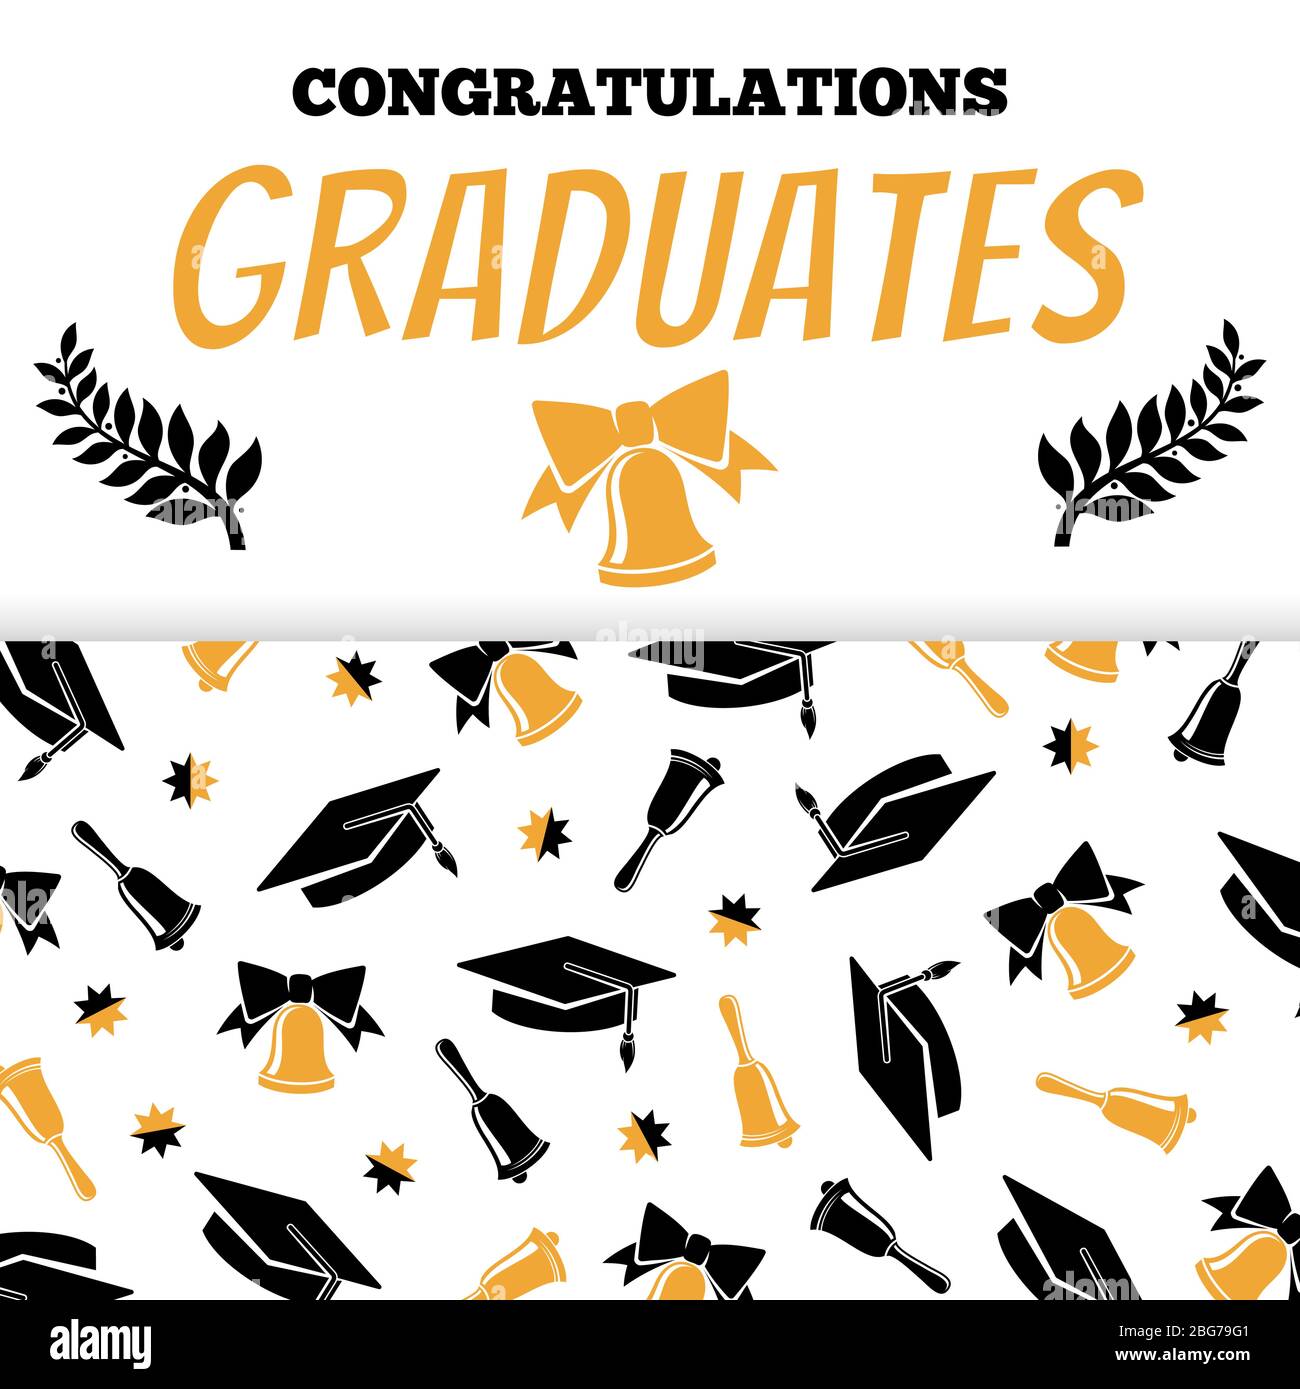 Congratlations graduates banner design with cap and bells silhouettes style. Vector illustration Stock Vector